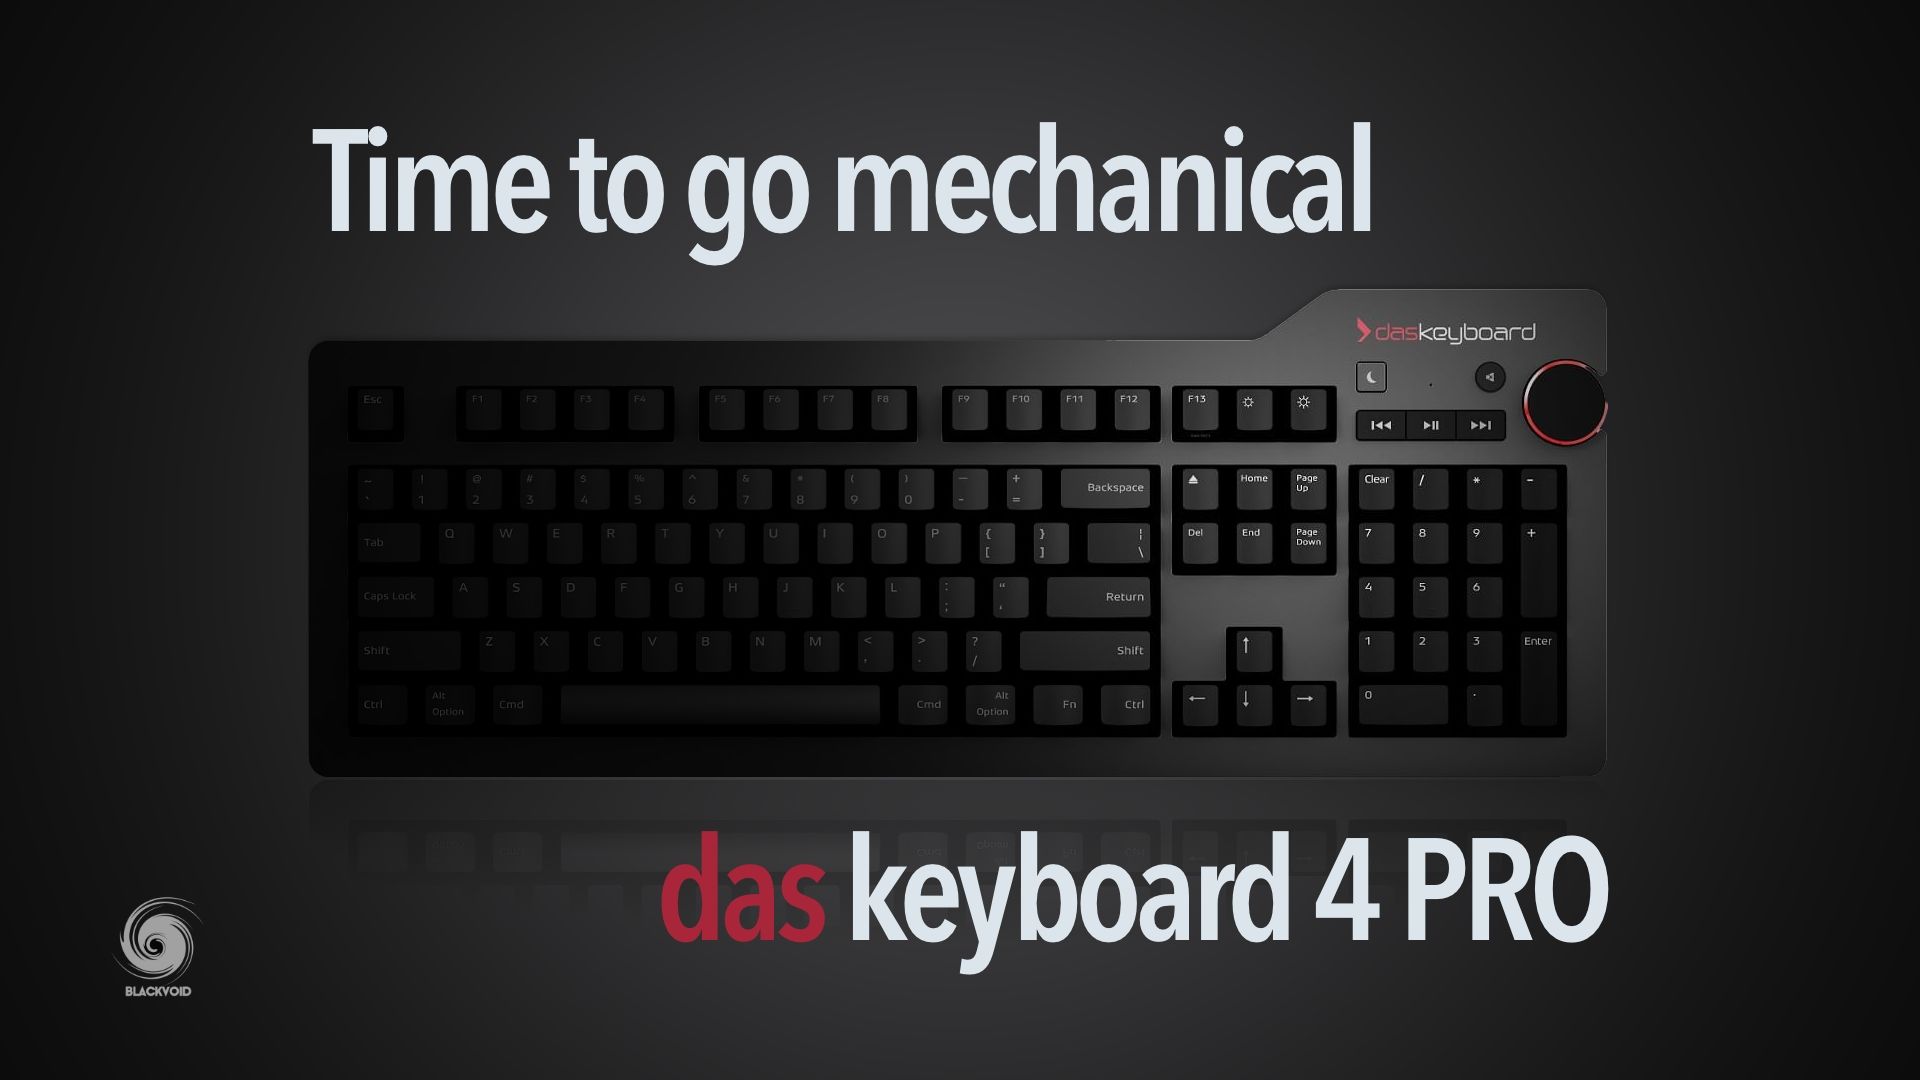 Time to go mechanical - dasKeyboard 4 PRO